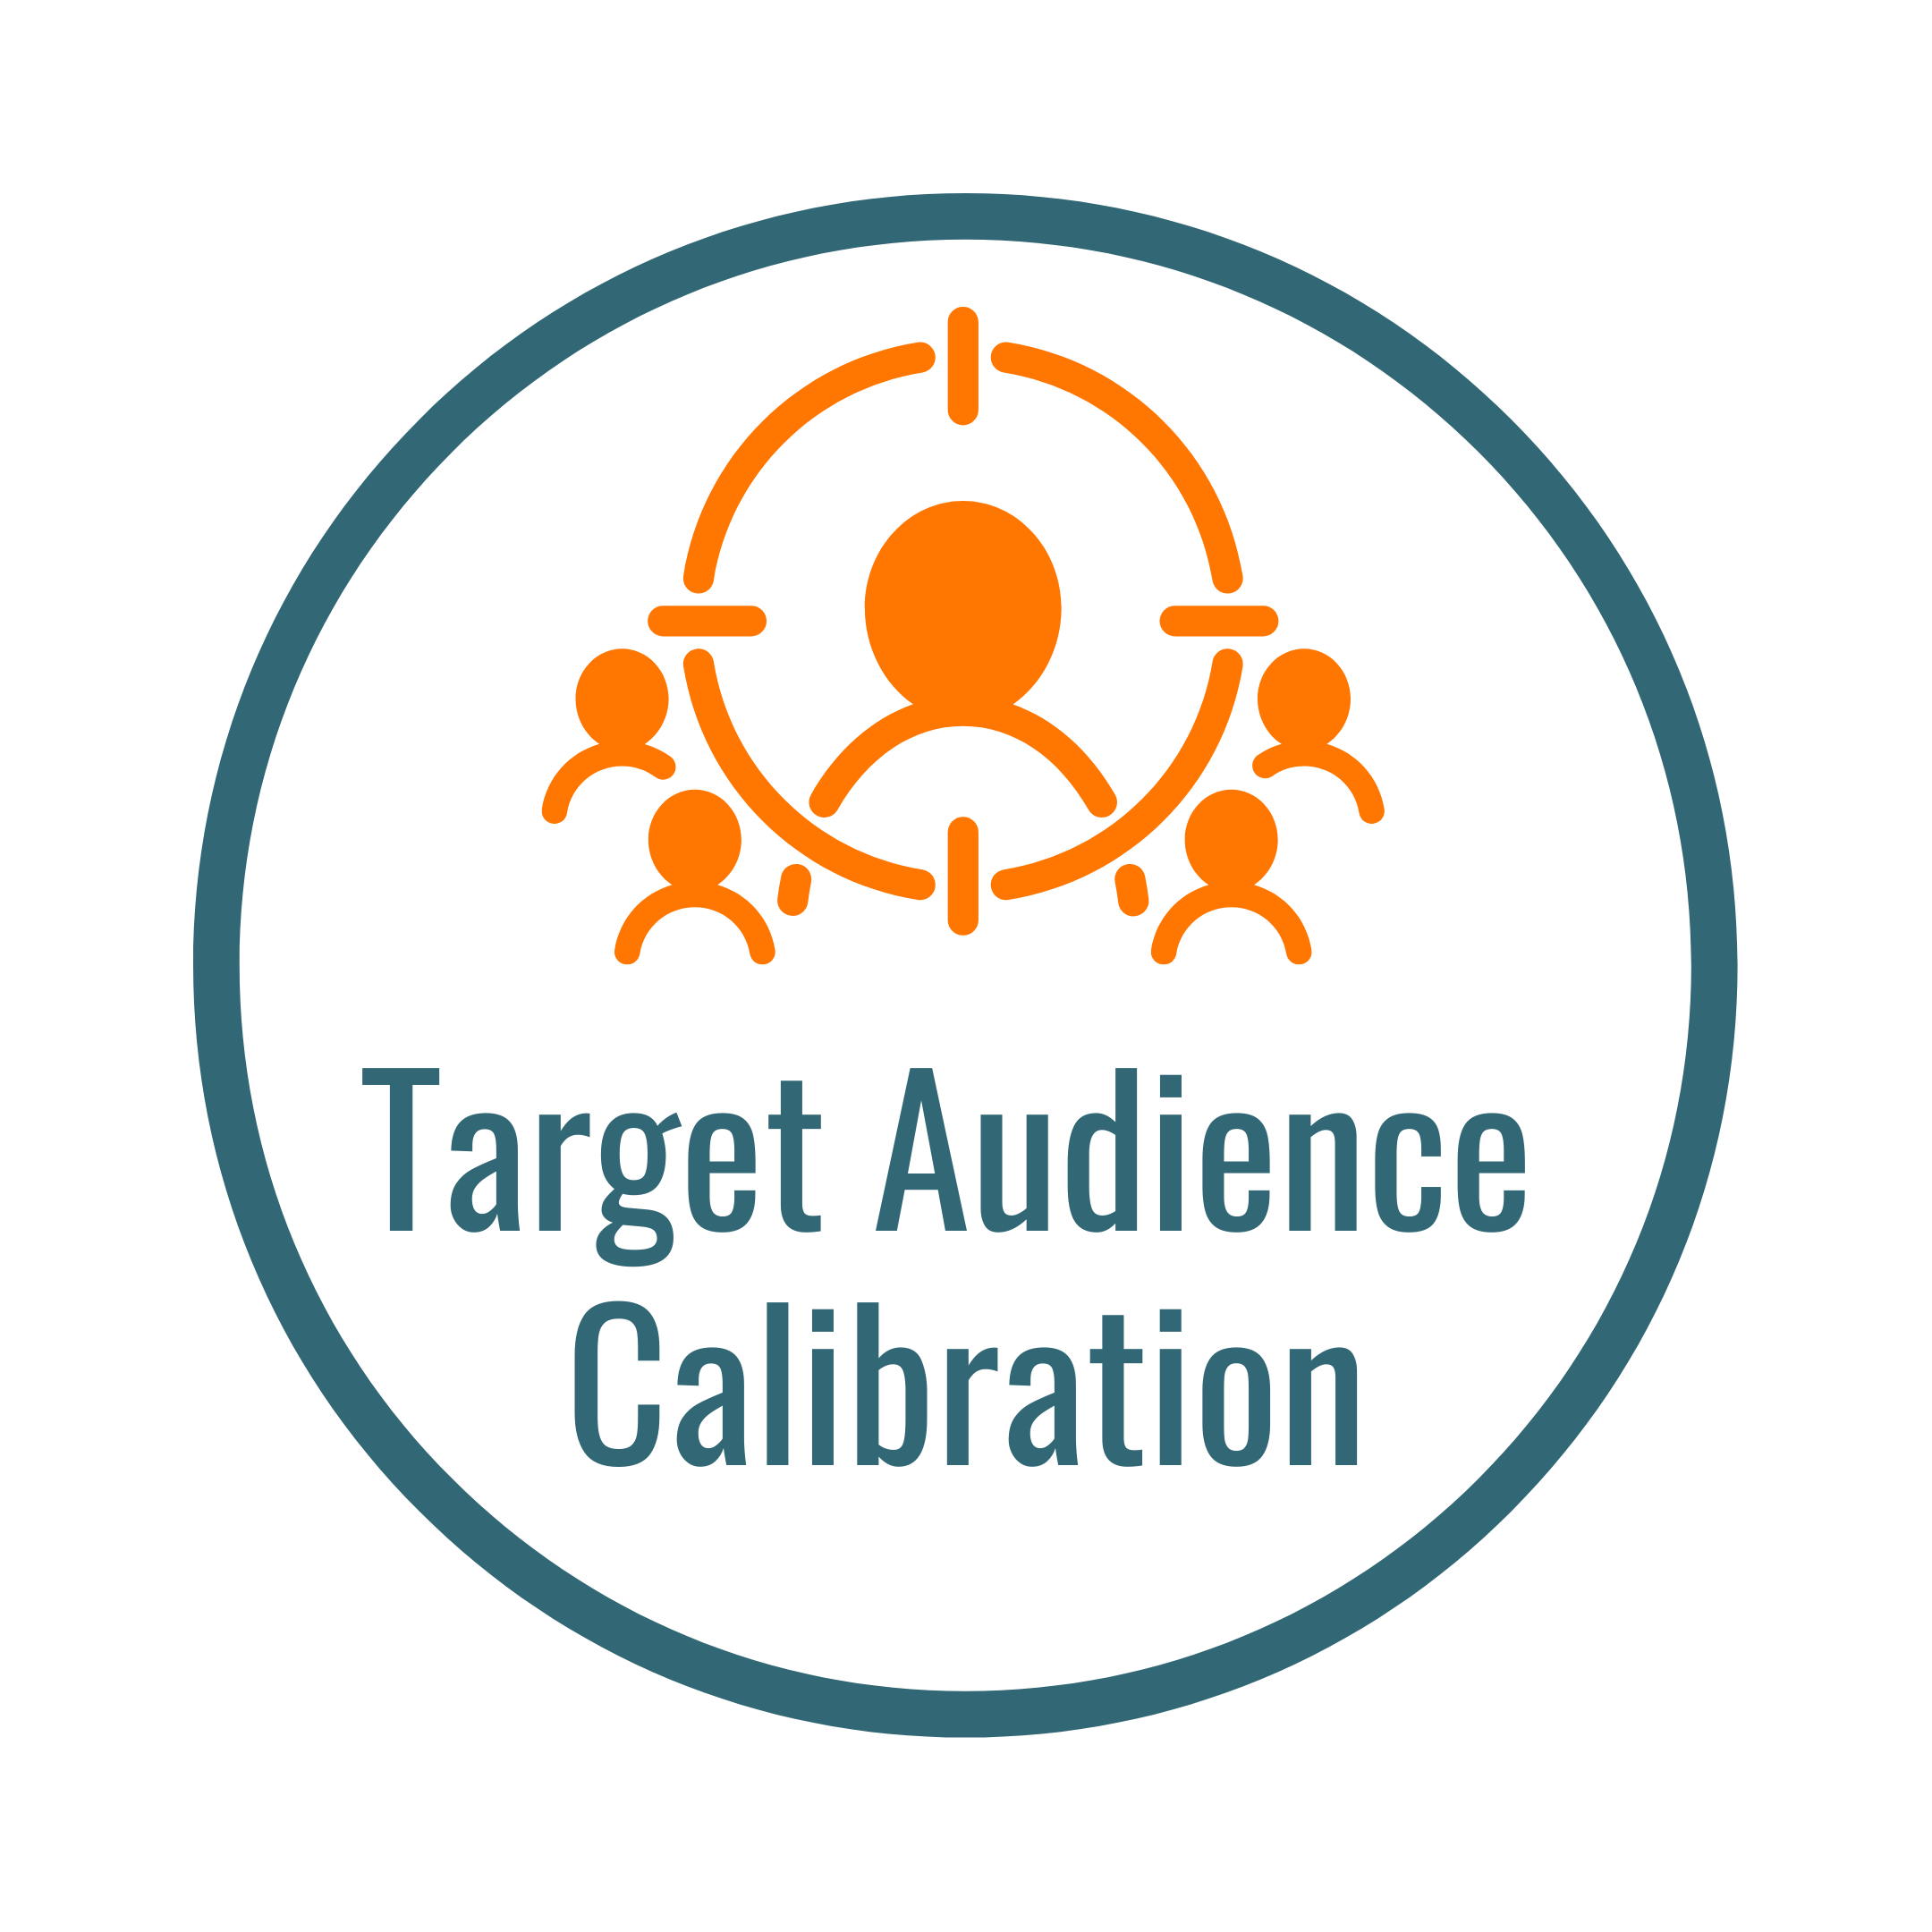 Podcast Coach Tim Wohlberg shares the importance of audience calibration